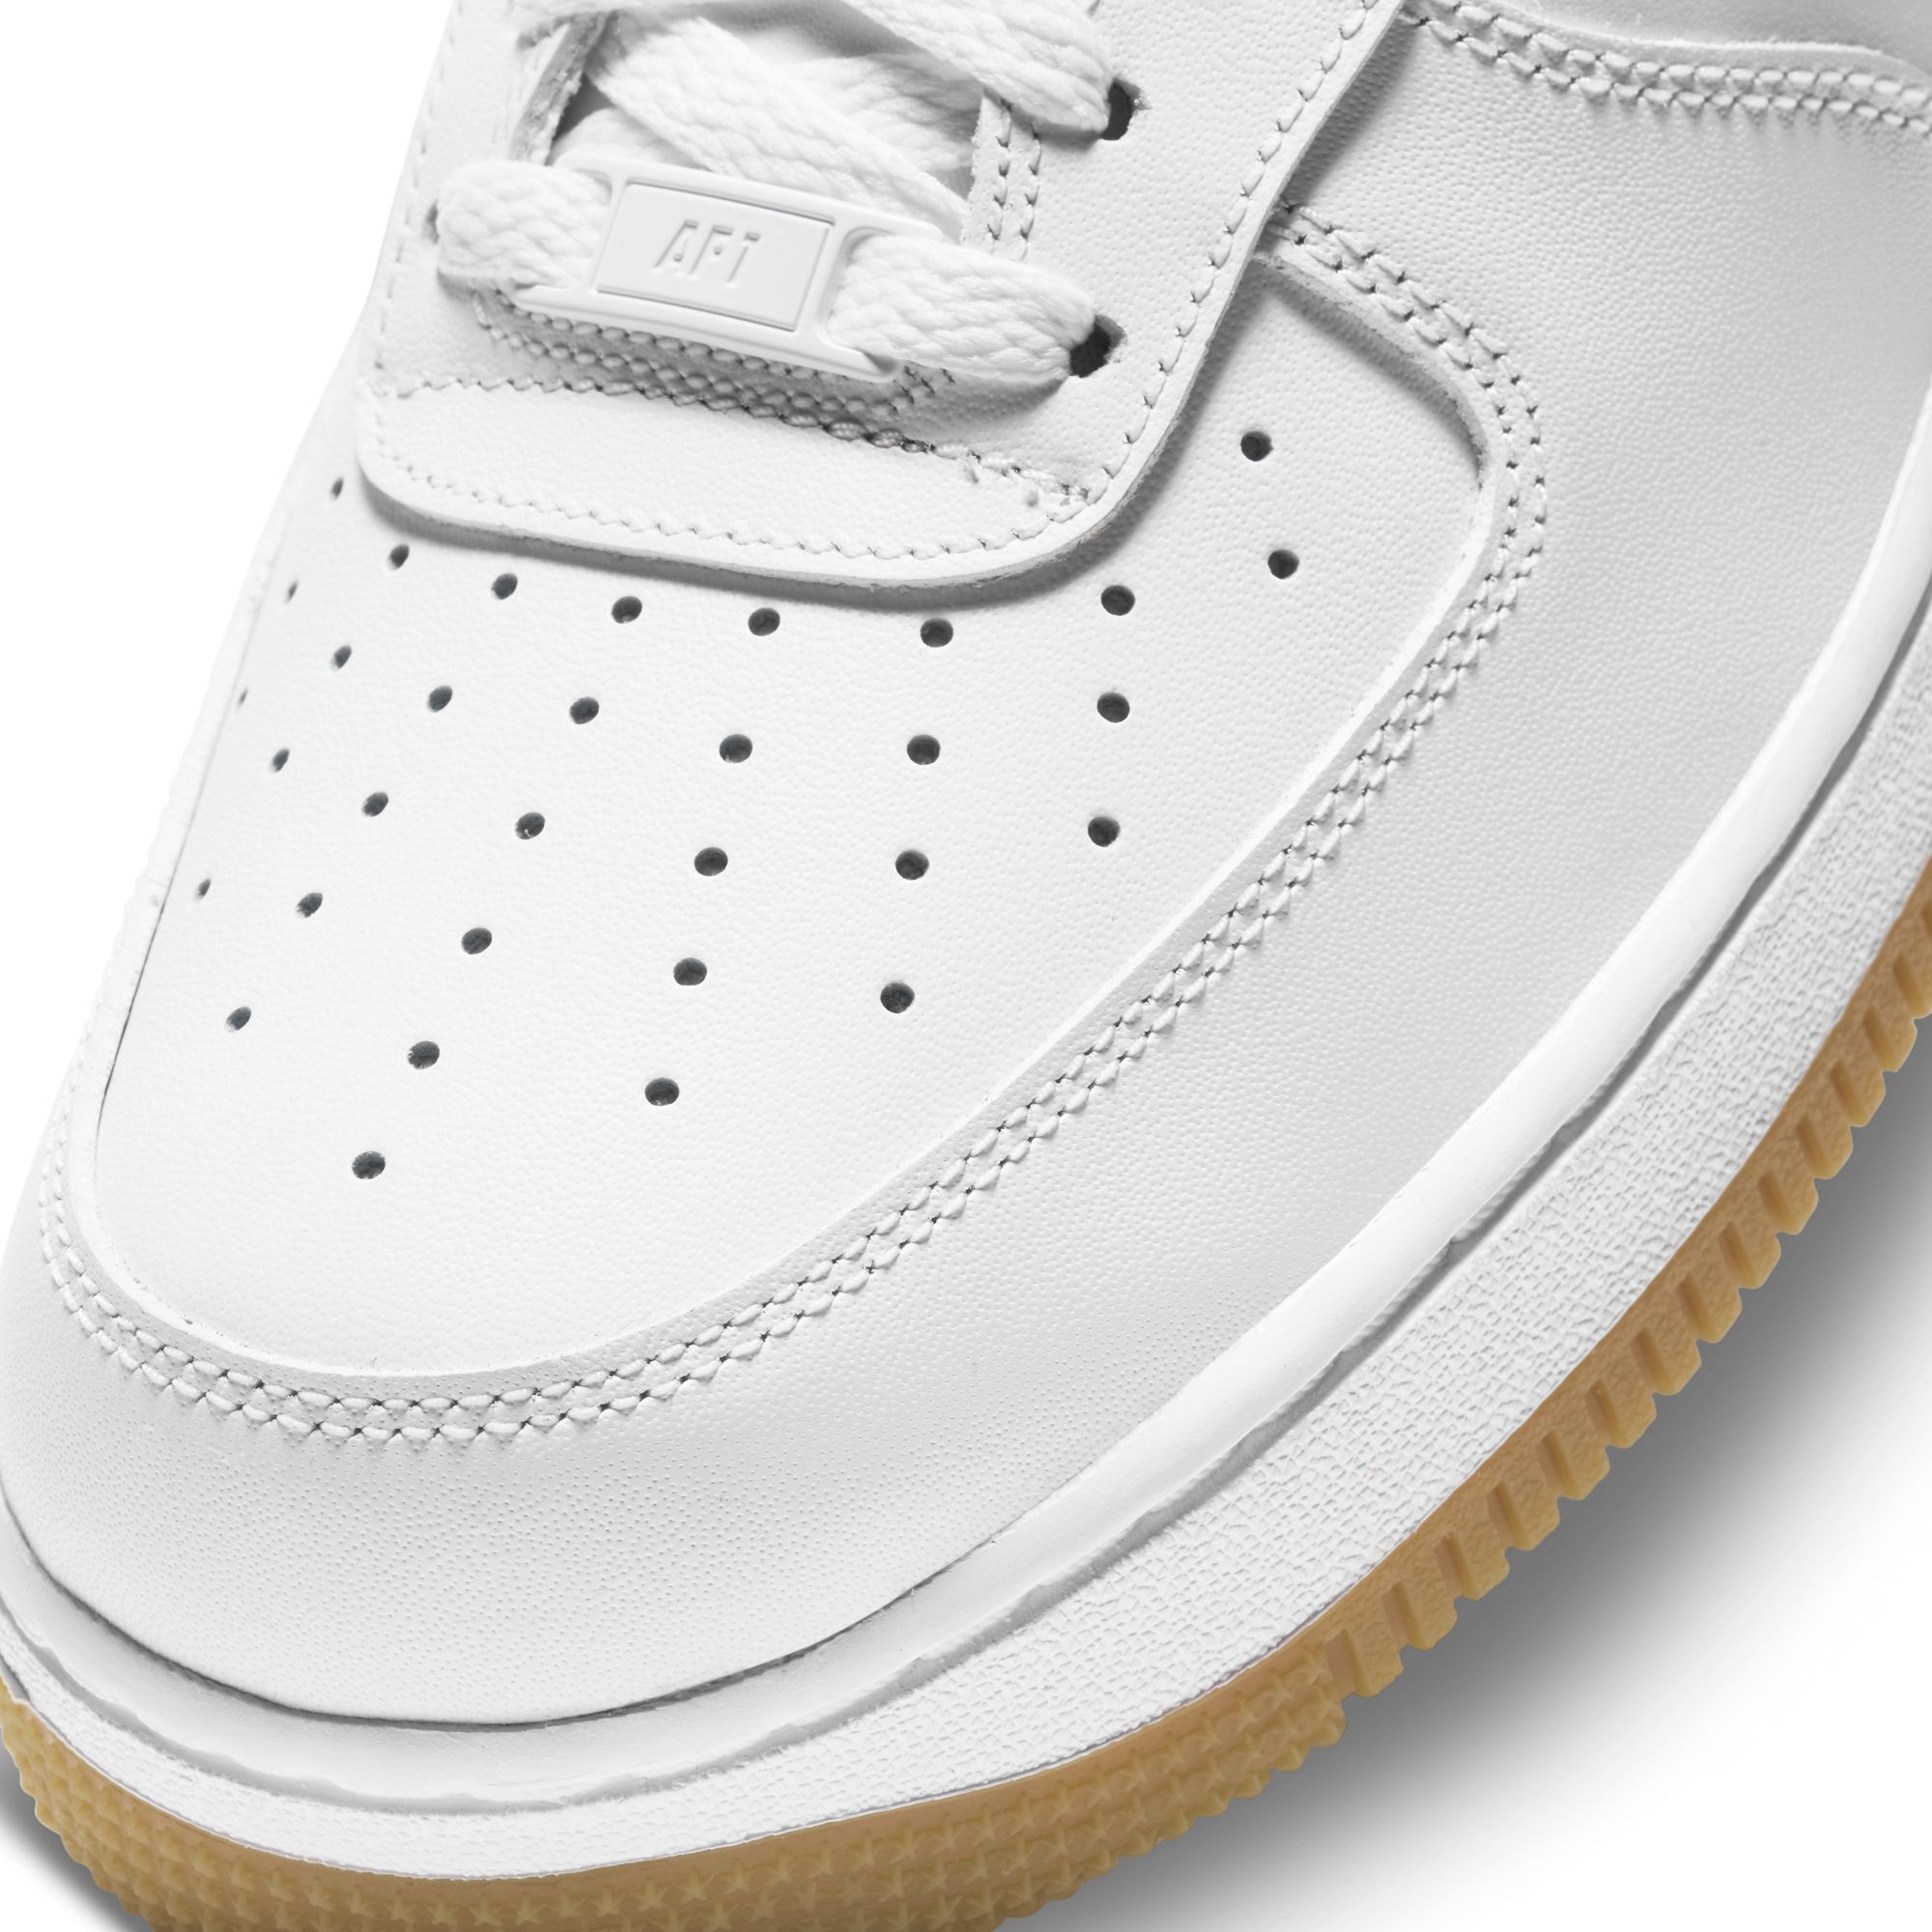 Nike Air Force 1 '07 Men's Shoes in White, Size: 9.5 | DJ2739-100